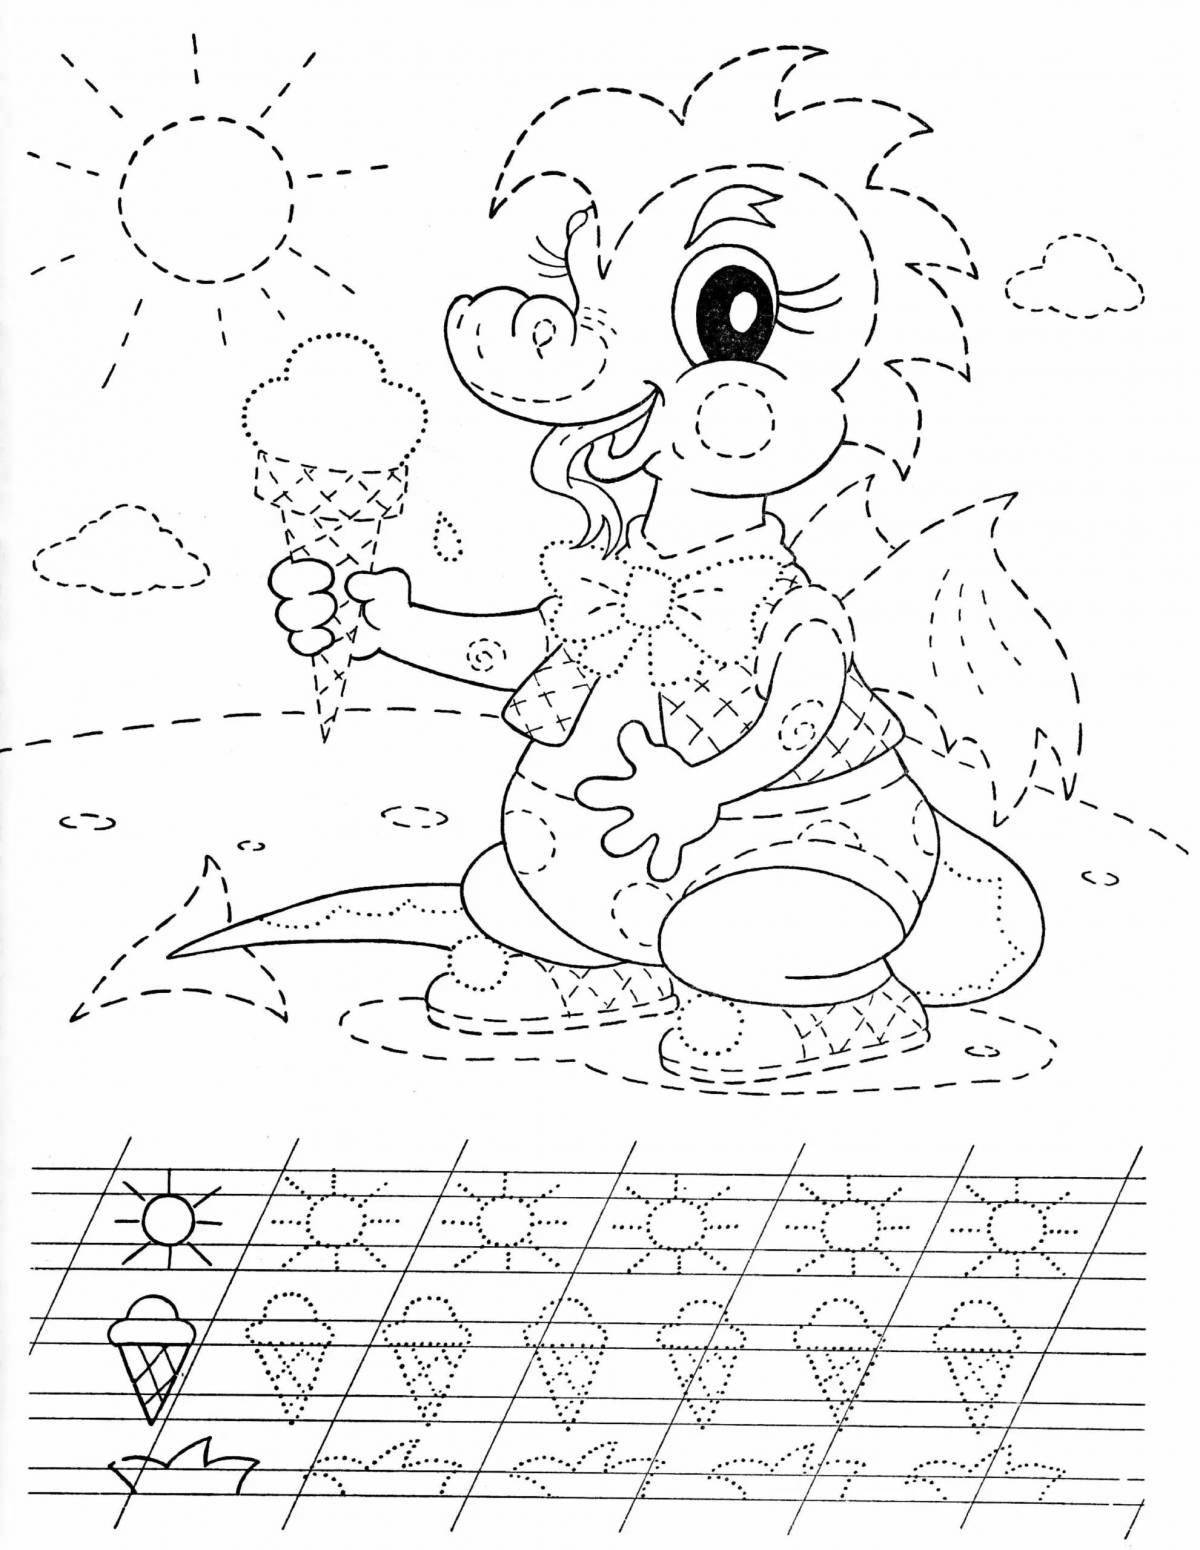 Bright copy of the coloring page